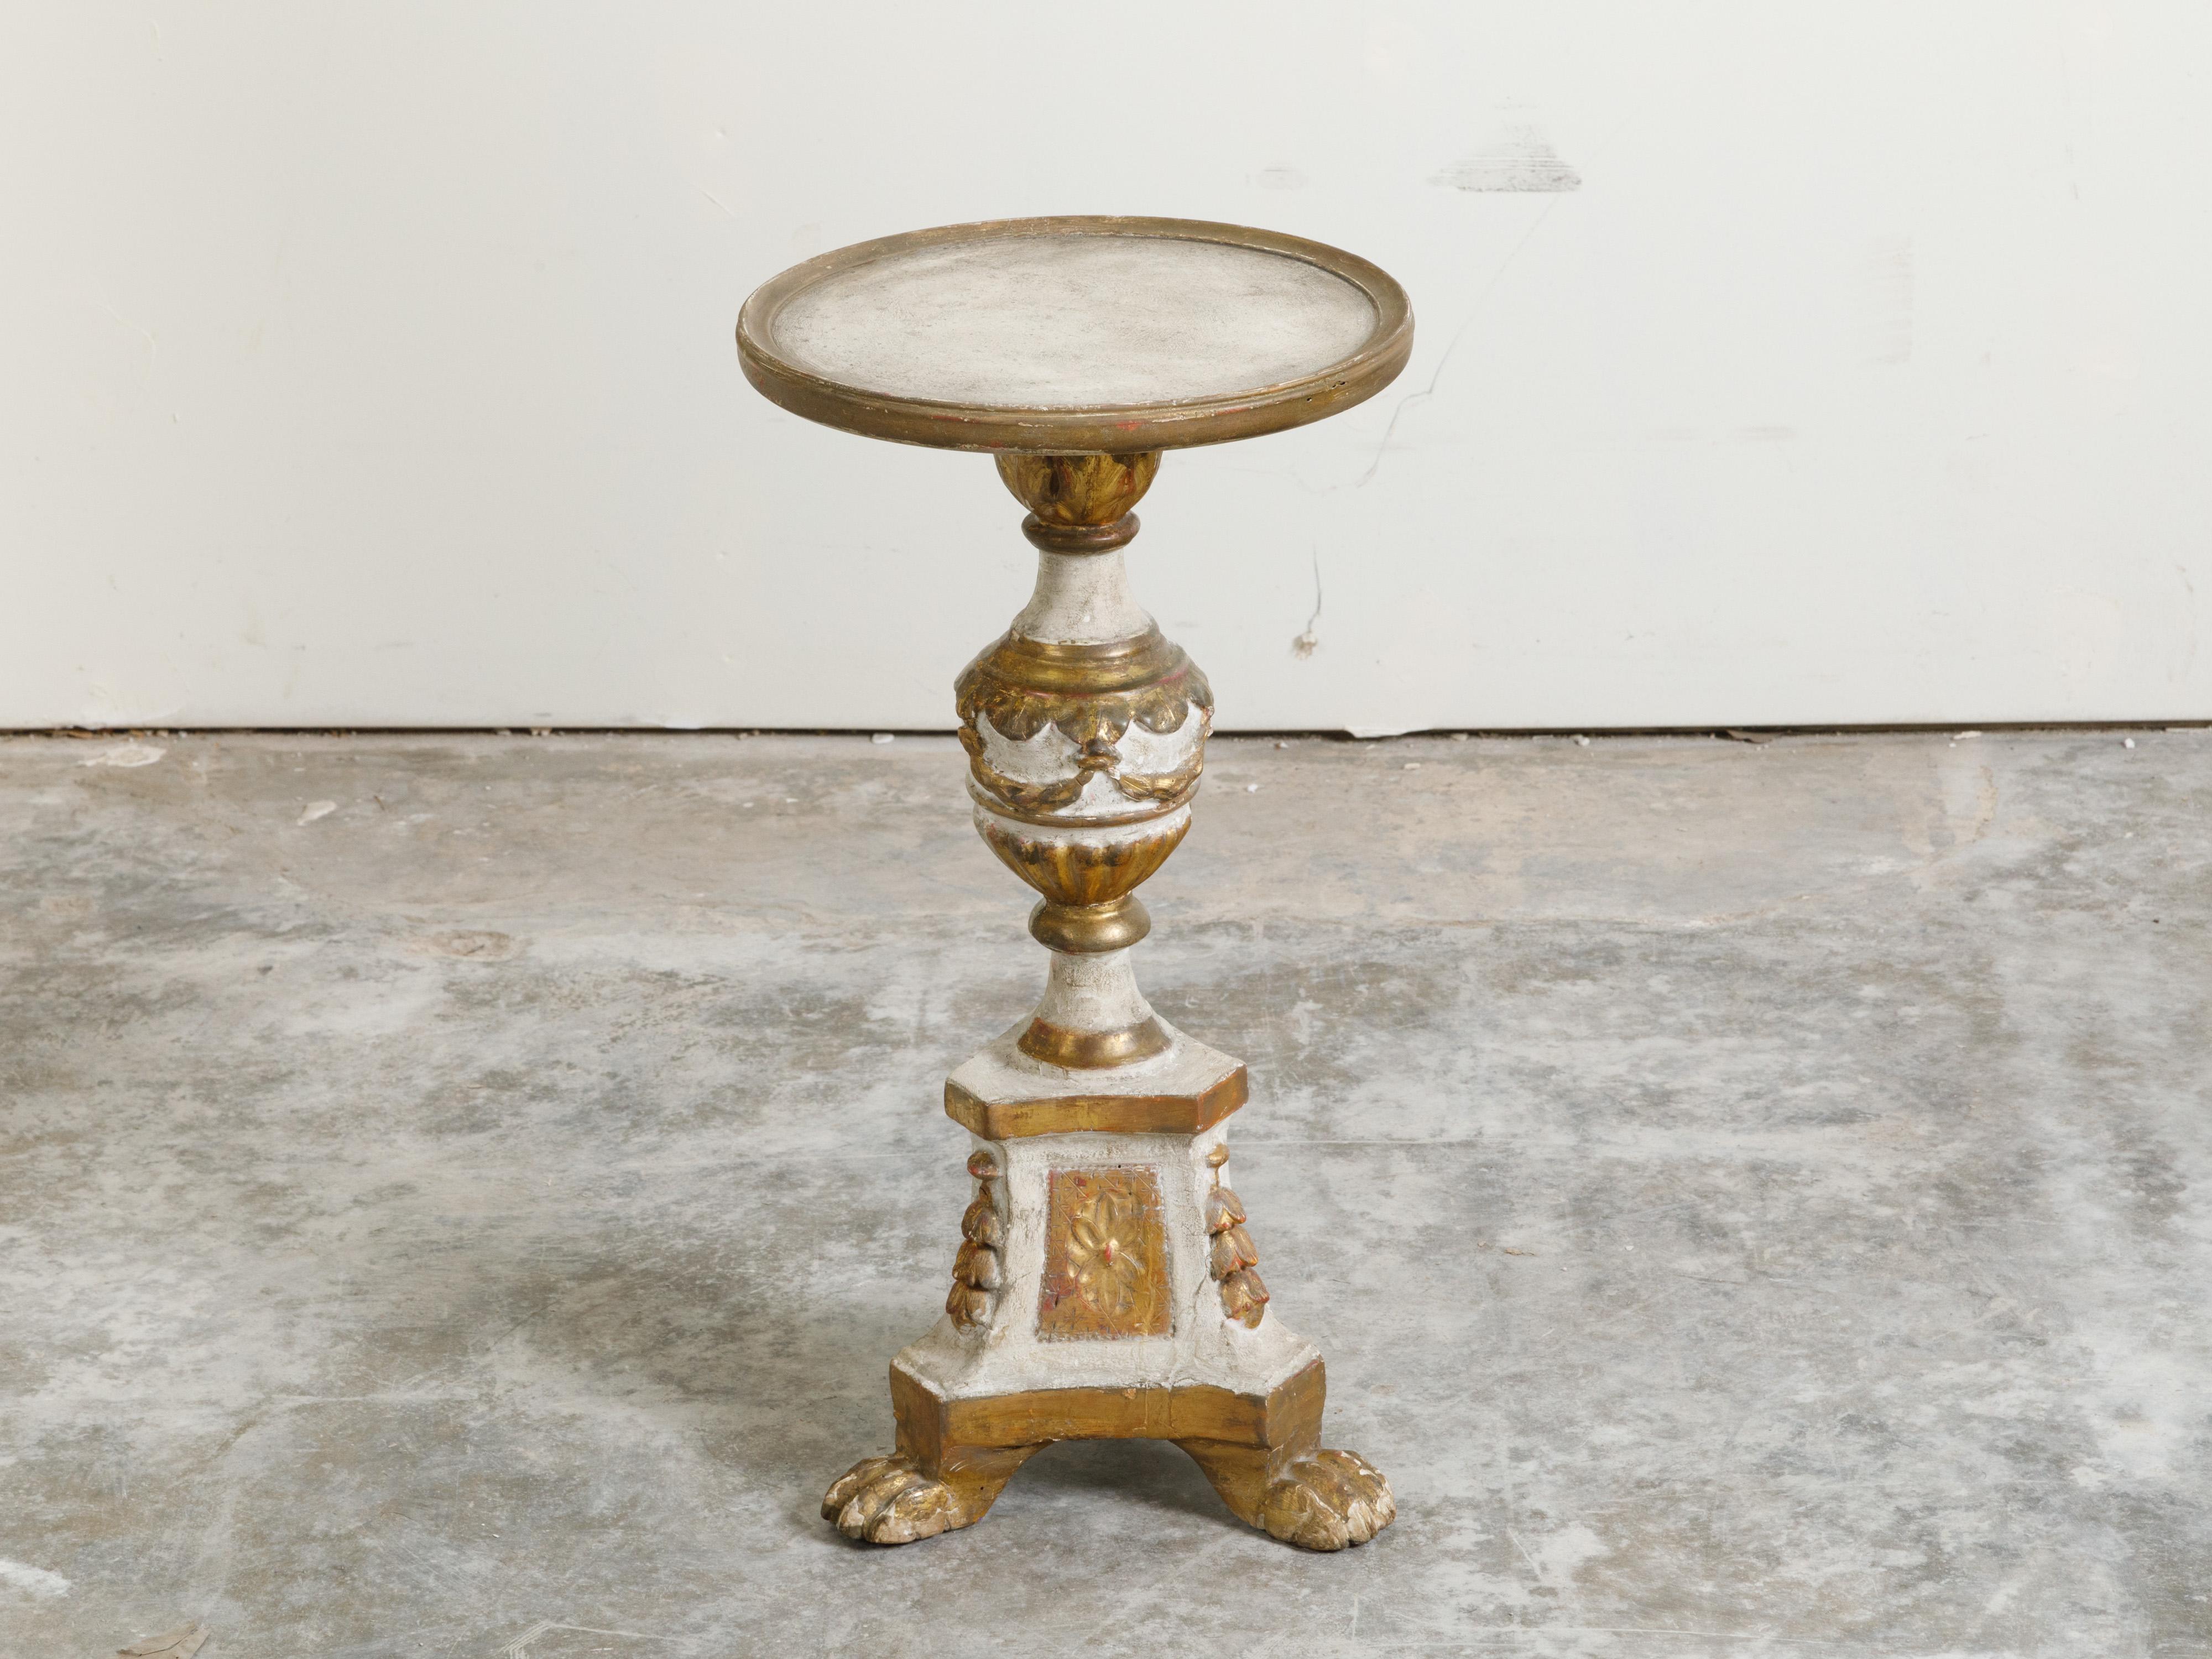 A French Restauration period painted and gilded guéridon table from the early 19th century, with carved motifs and lion paw feet. Created in France during the reign of King Louis XVIII, this guéridon table features a circular top sitting above